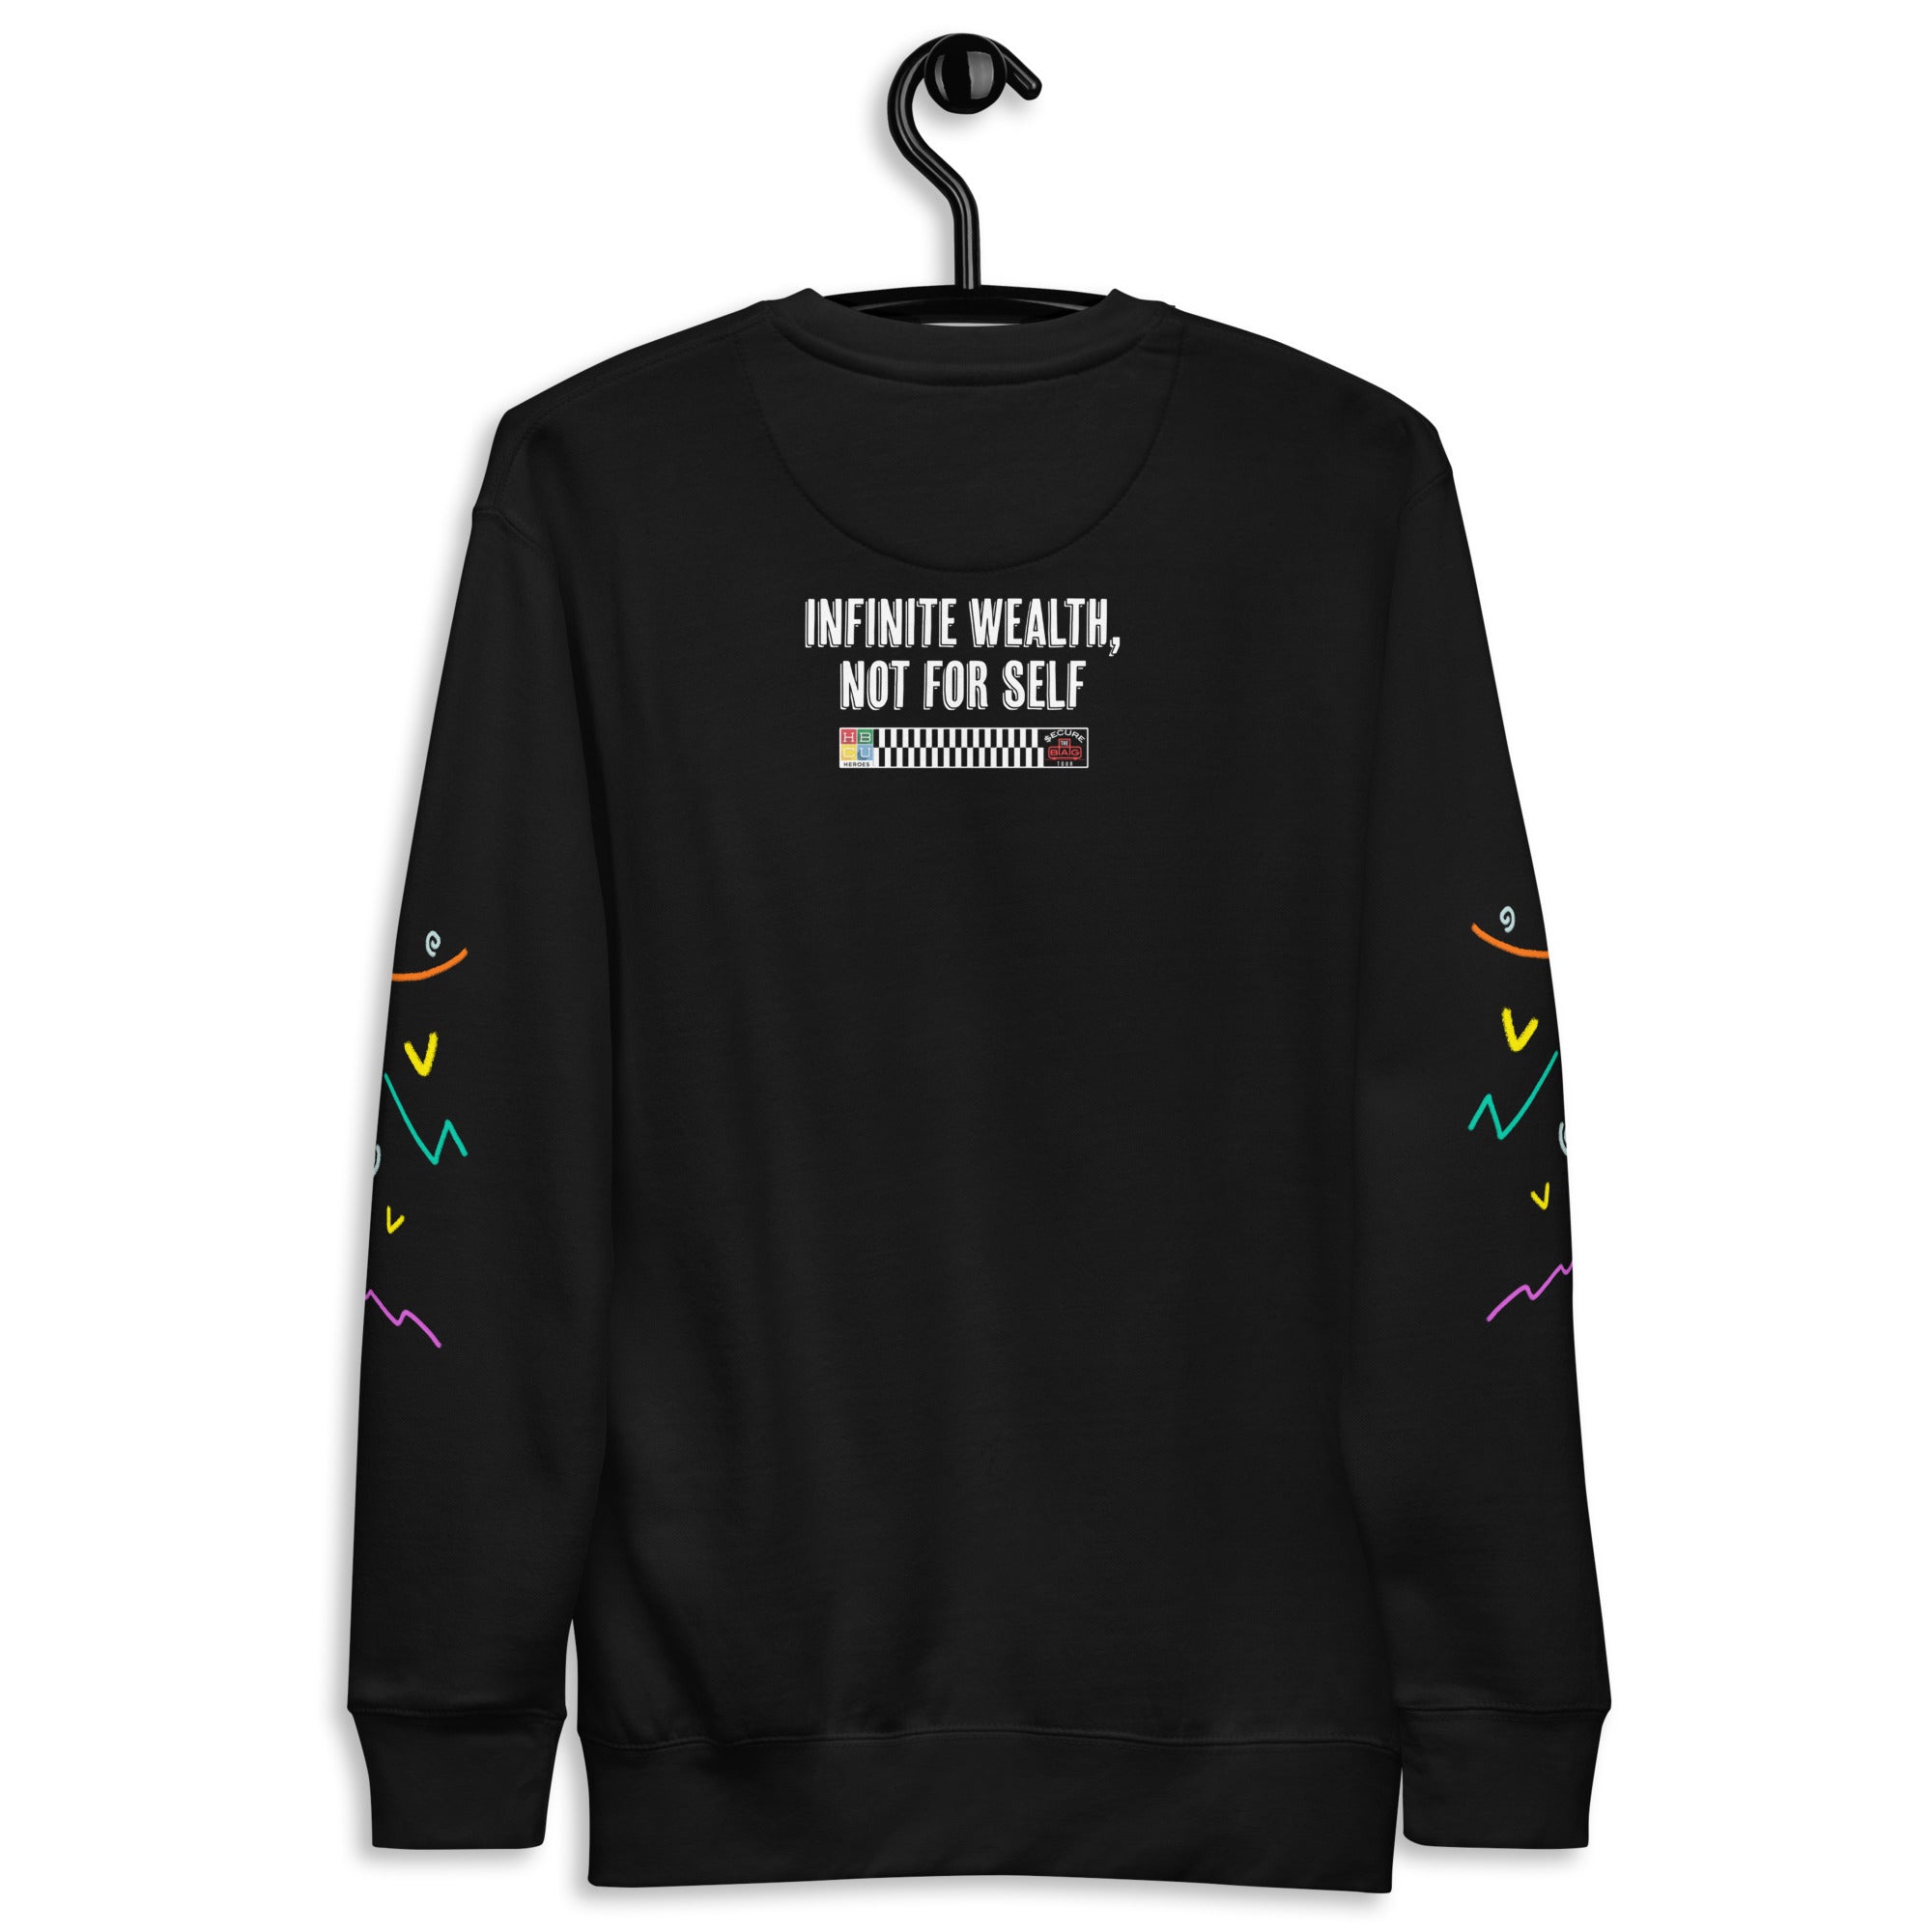 Only 45.00 usd for Why Not Sweatshirt Online at the Shop